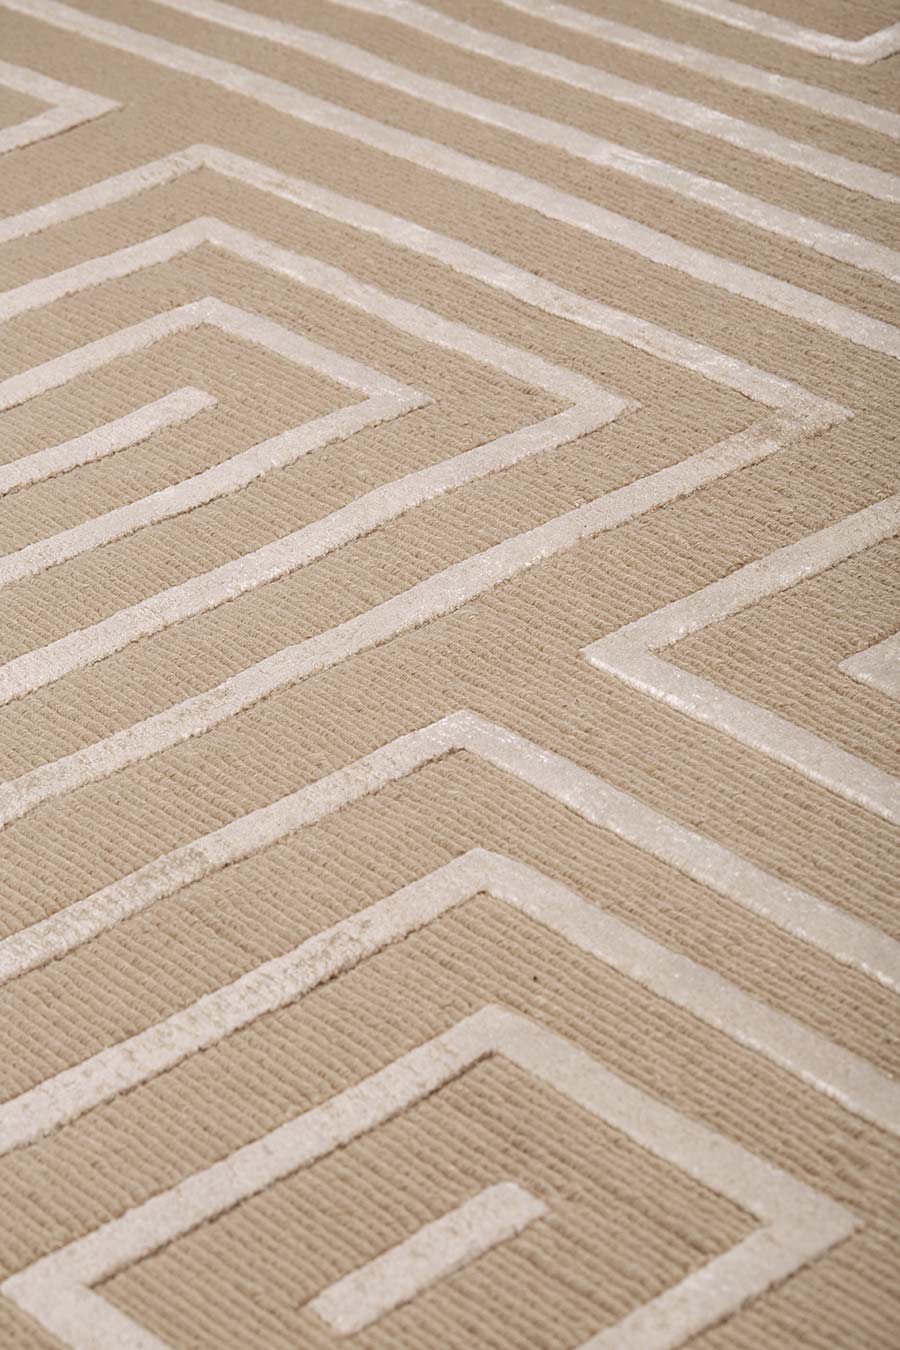 Detailed image of geometric Grave rug in beige